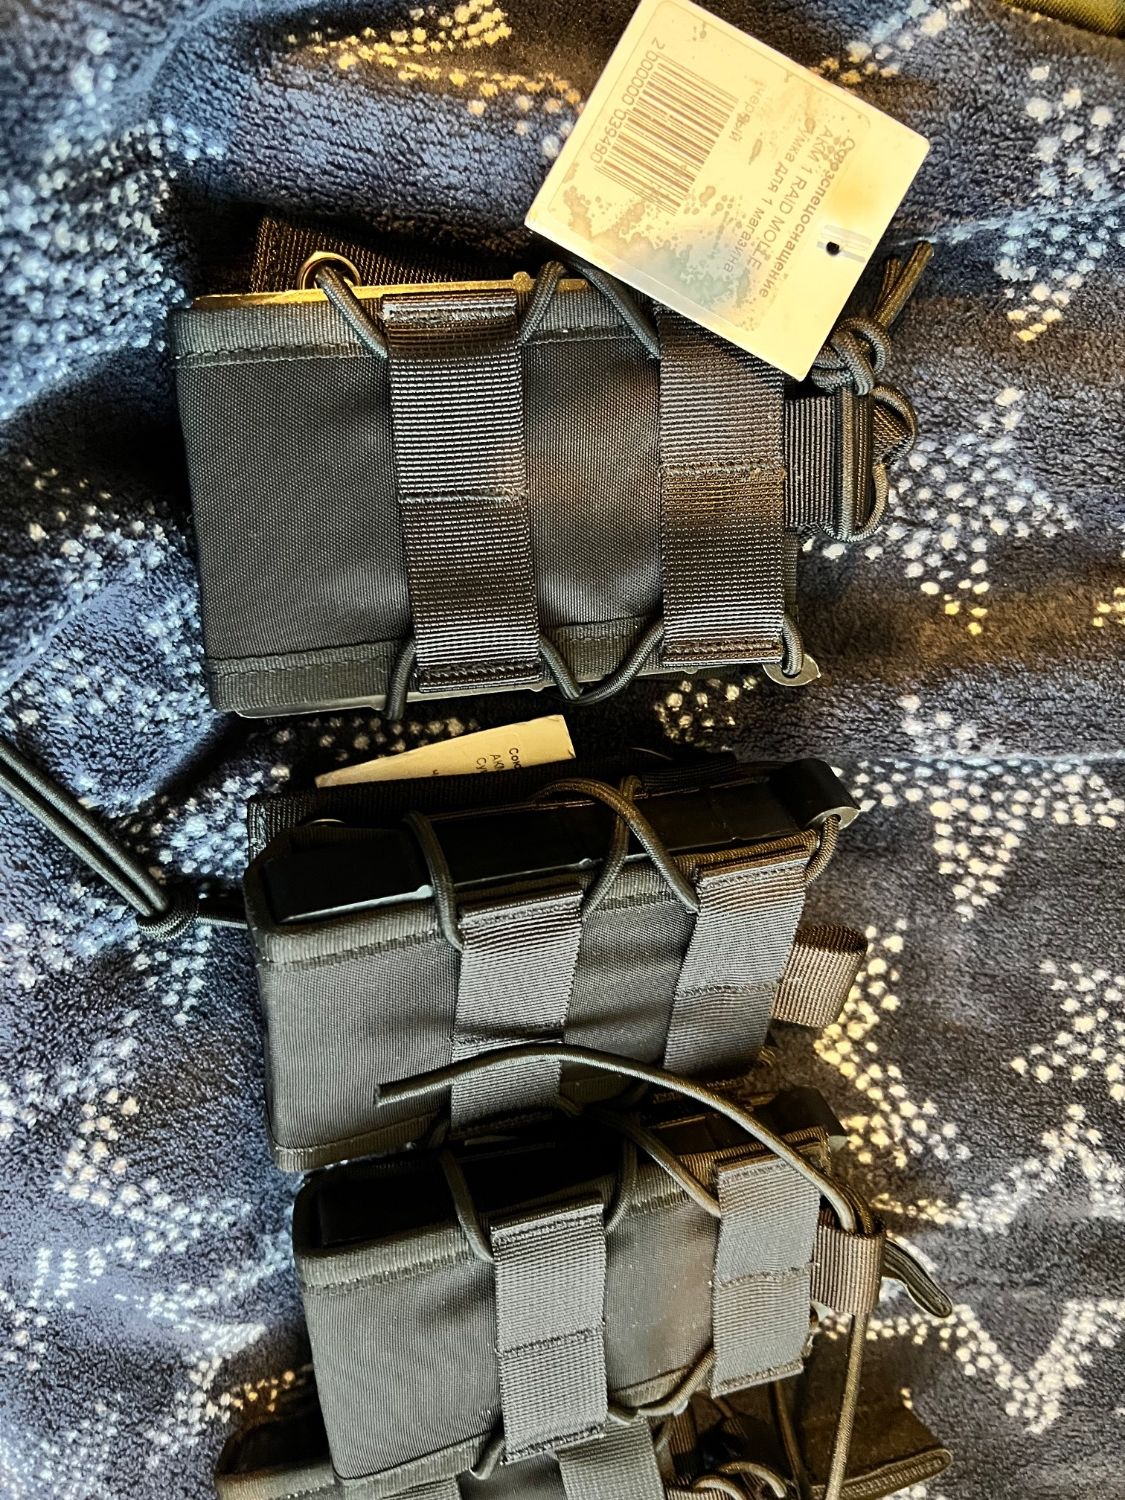 Russian SSO Ak pouches - Parts - Airsoft Forums UK